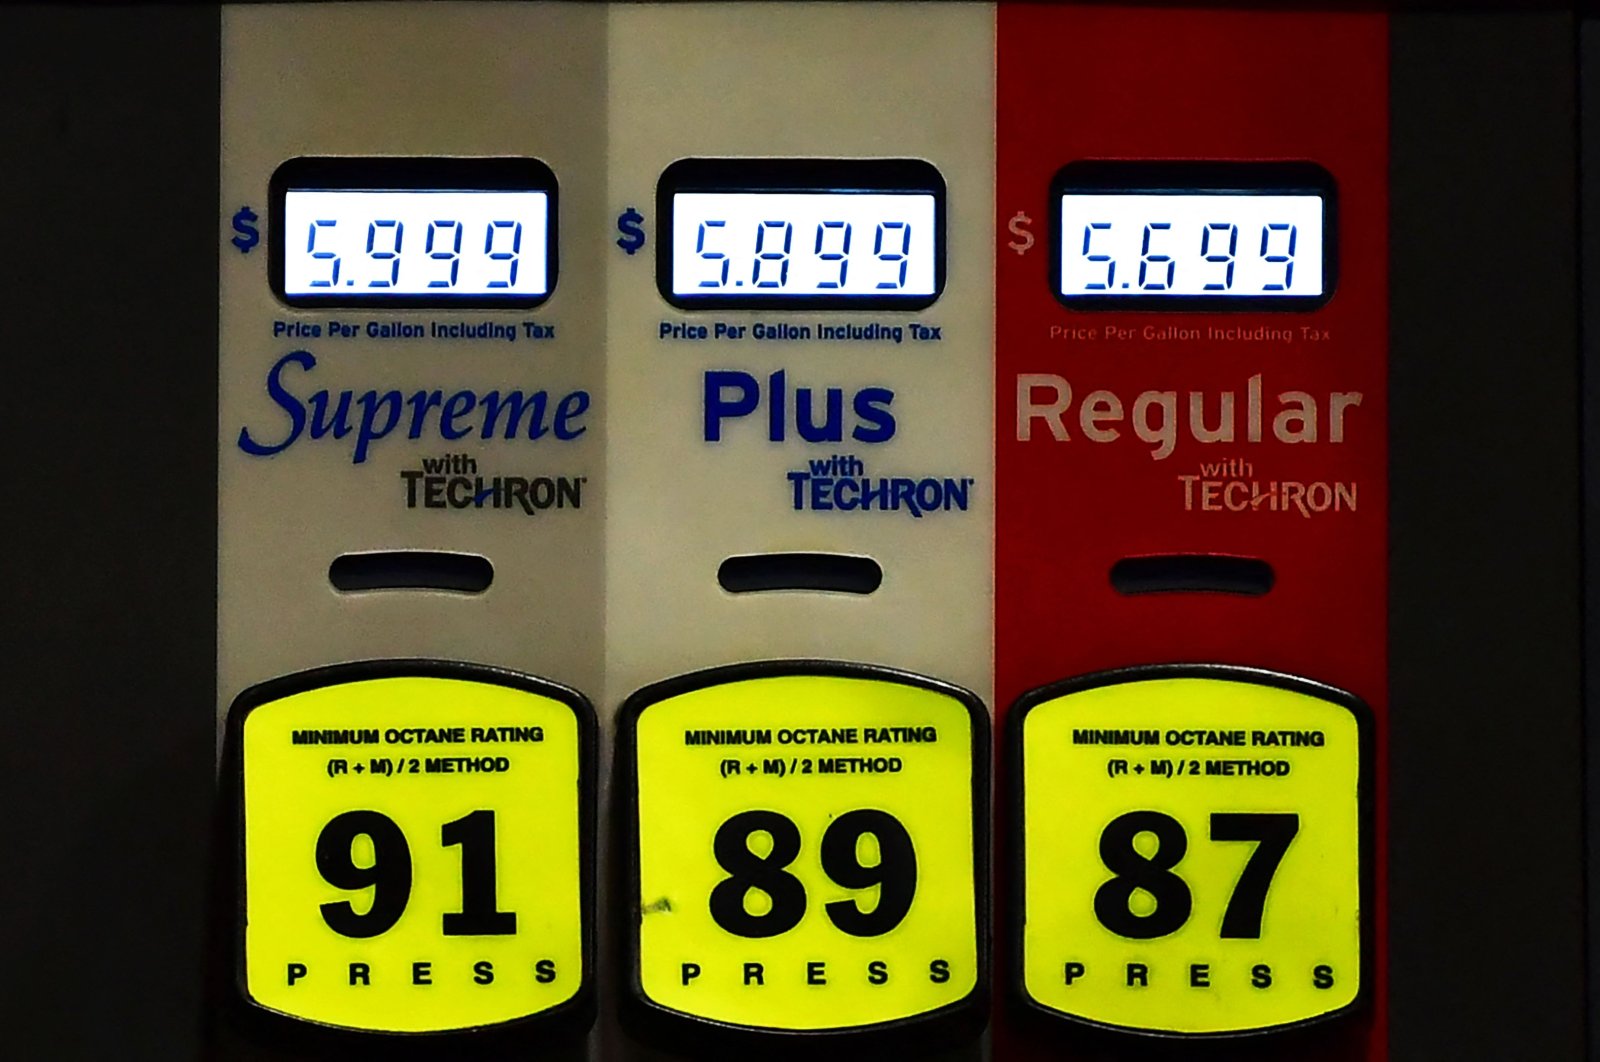 Prices for gas and diesel fuel, over $5 a gallon, are displayed at the pump of a petrol station in Monterey Park, California, U.S., March 4, 2022. (AFP Photo)